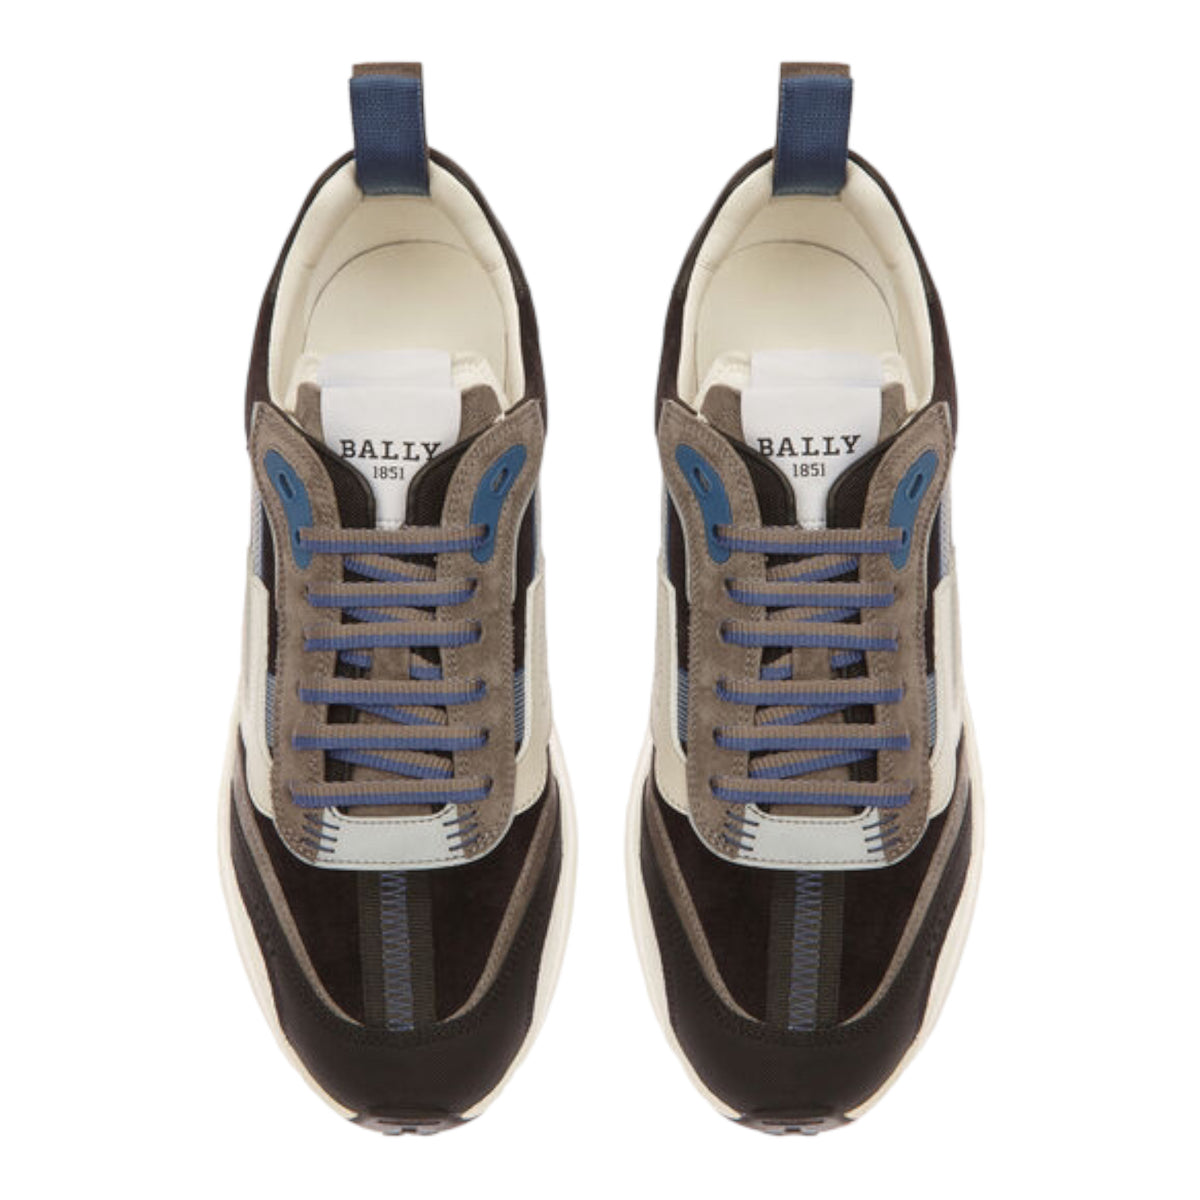 Bally Men's Darky Leather Sneakers